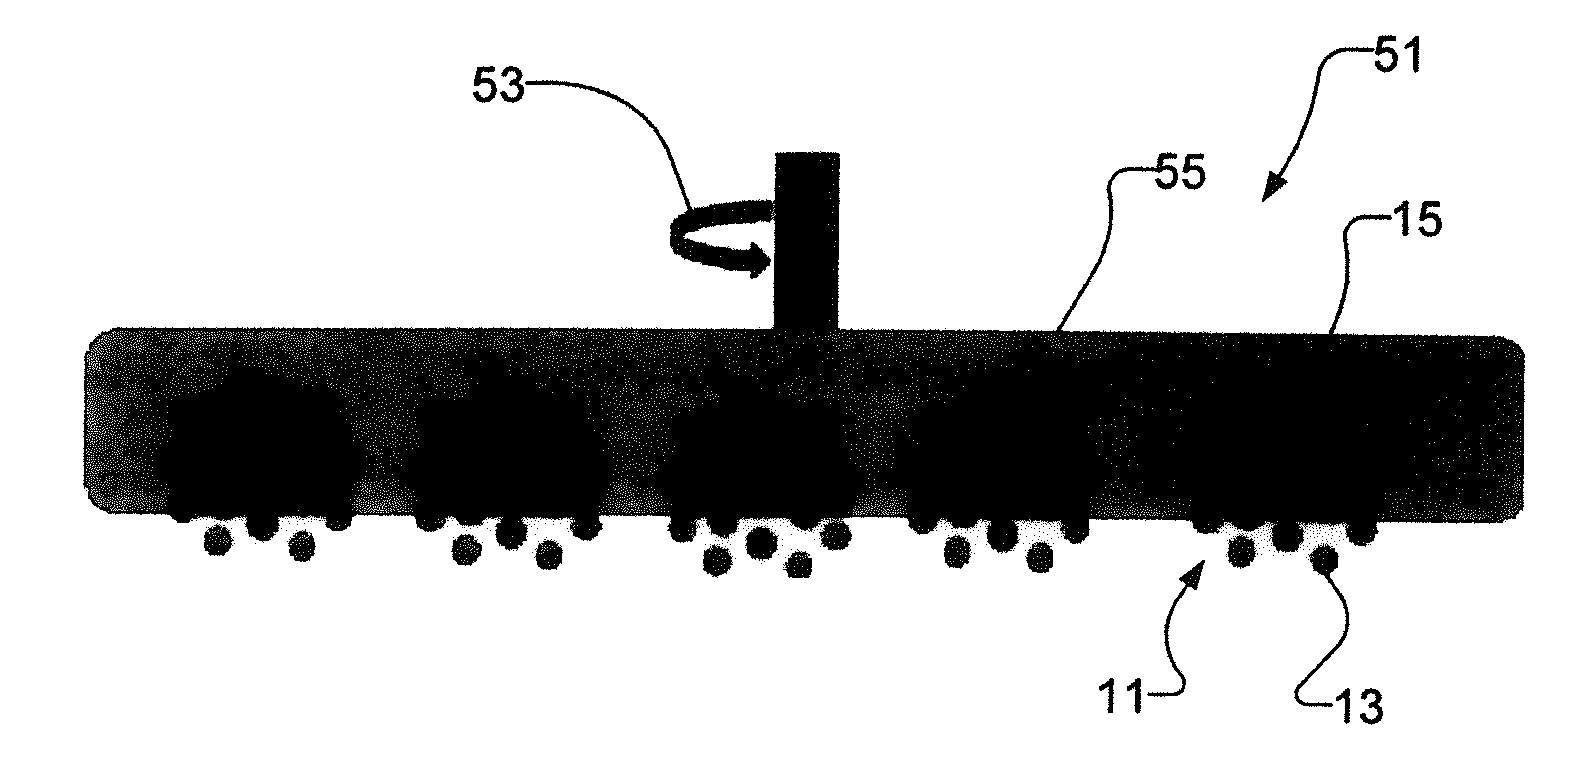 Chemical Mechanical Planarization Slurry Composition Comprising Composite Particles, Process for Removing Material Using Said Composition, CMP Polishing Pad and Process for Preparing Said Composition